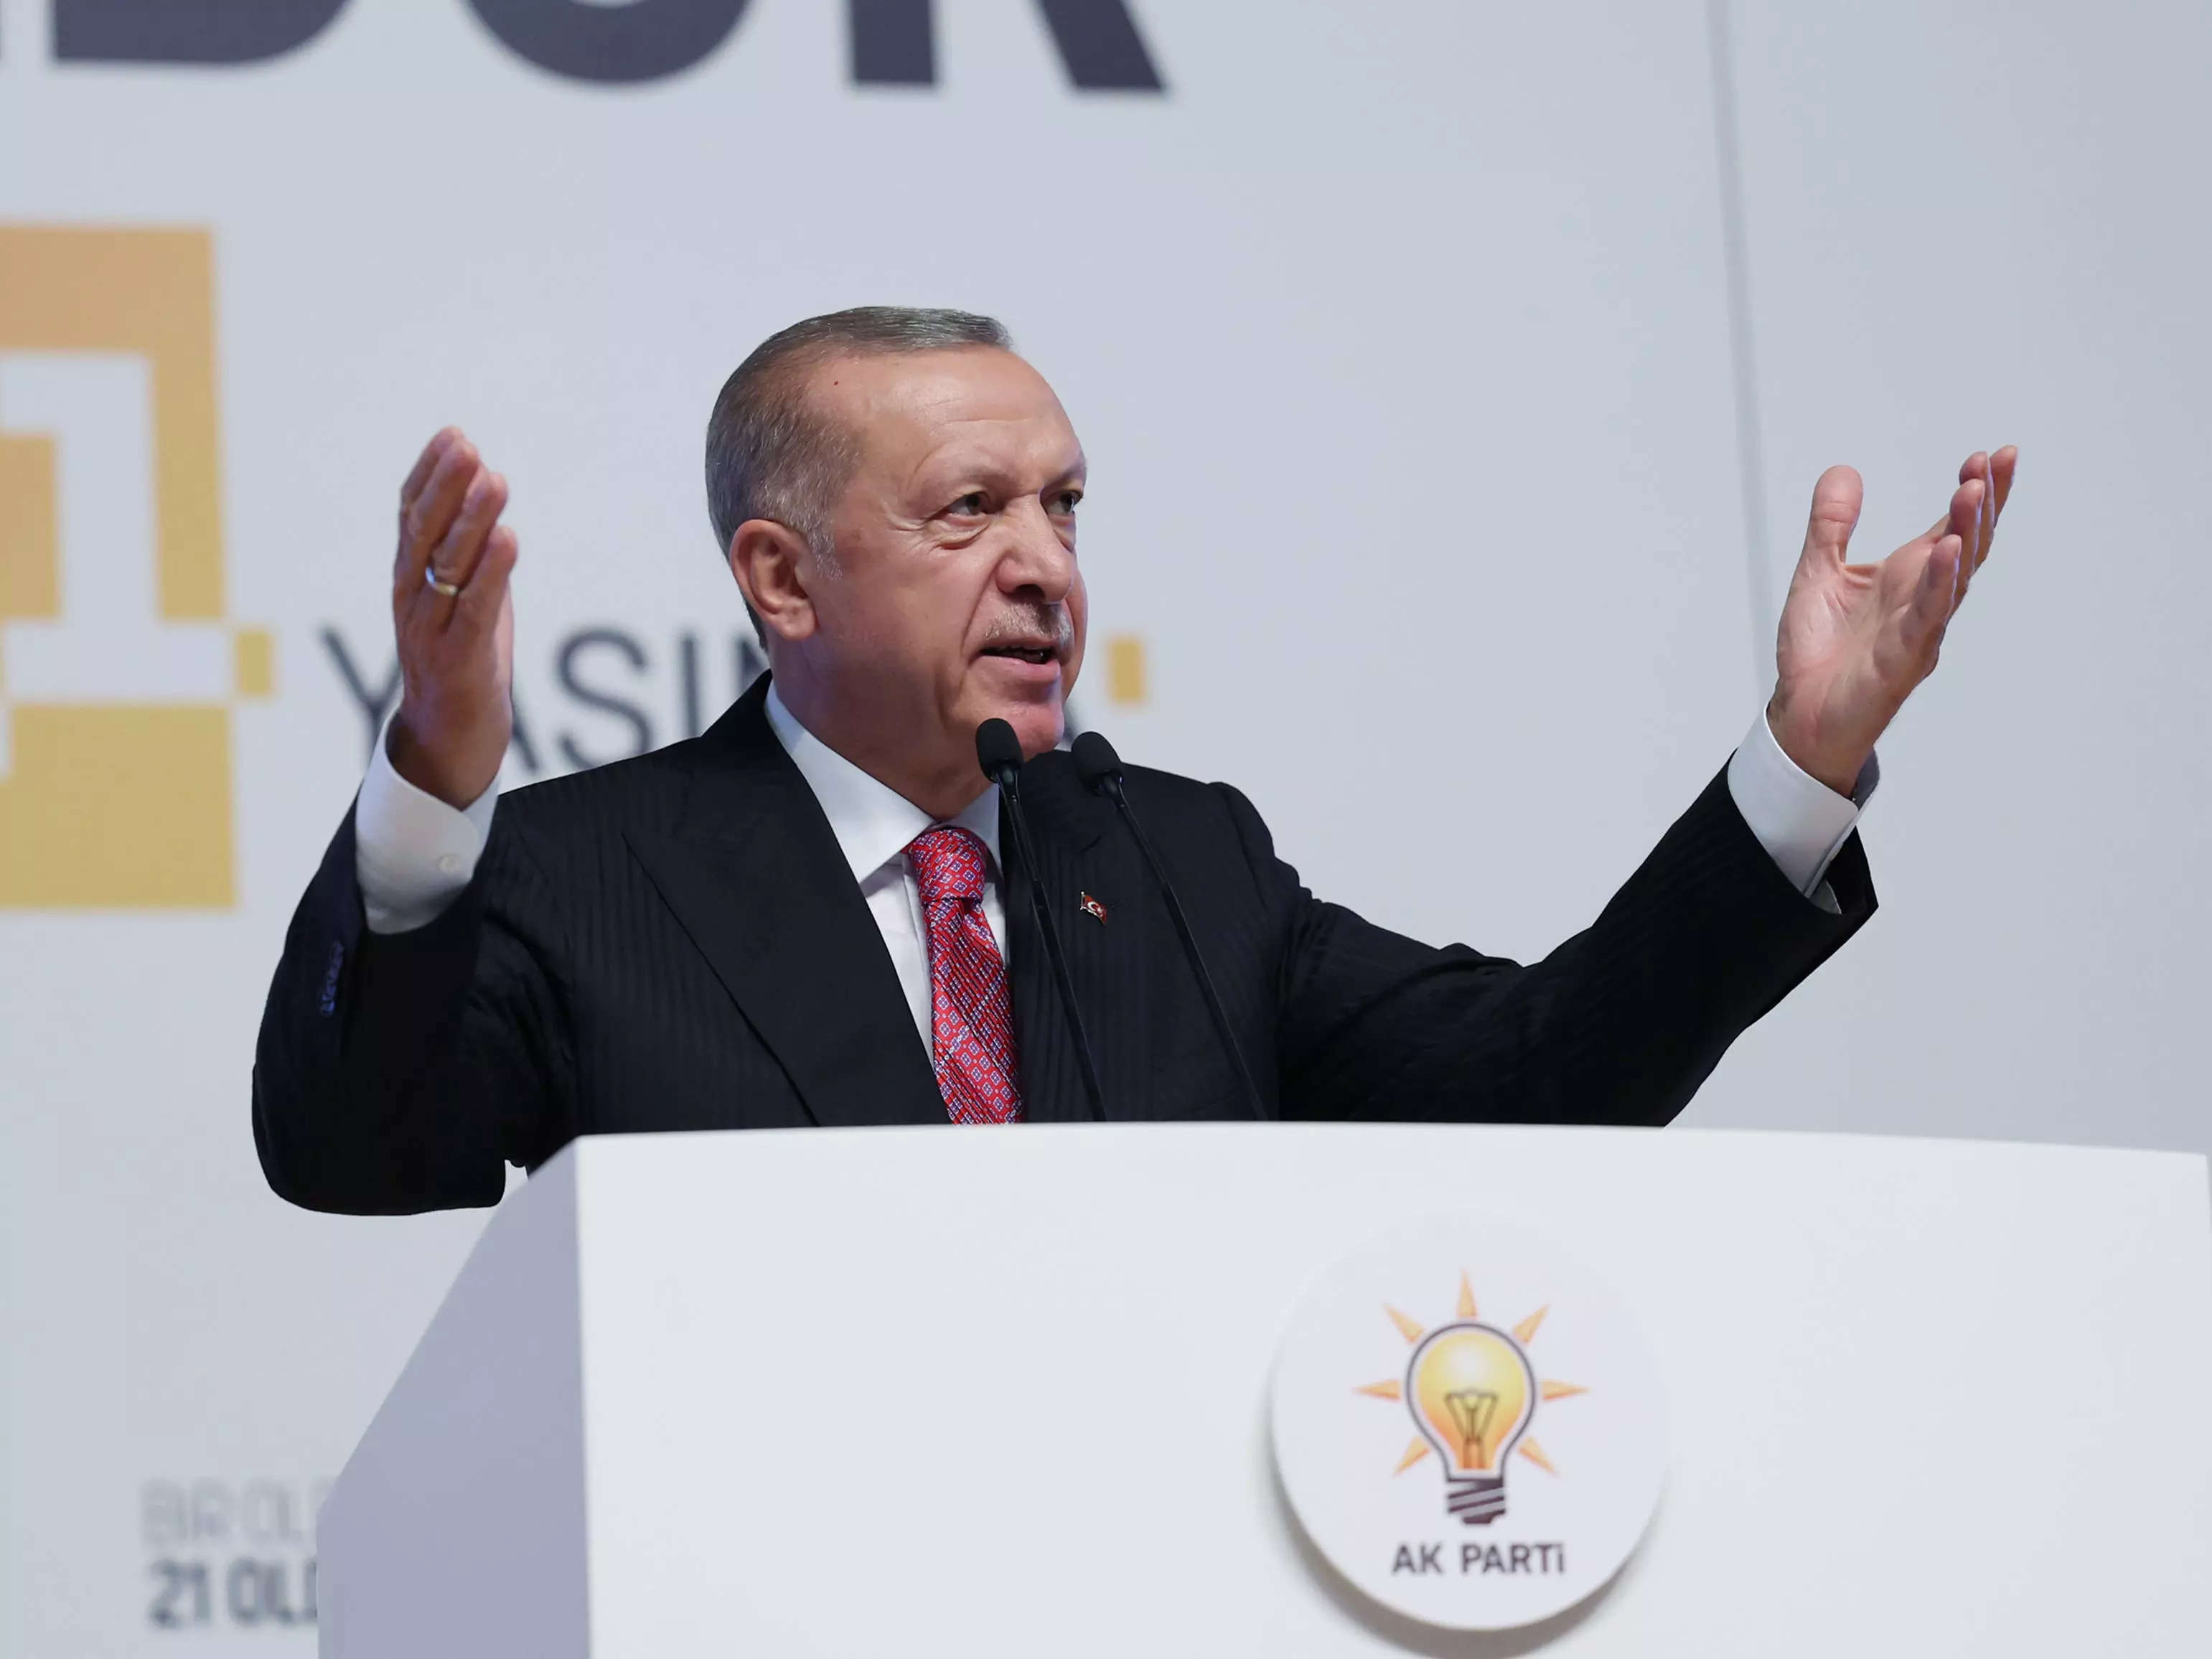 Turkish President Erdoğan mocks British pound, says currency has ‘exploded’ even as Turkish lira faces economic crisis of its own